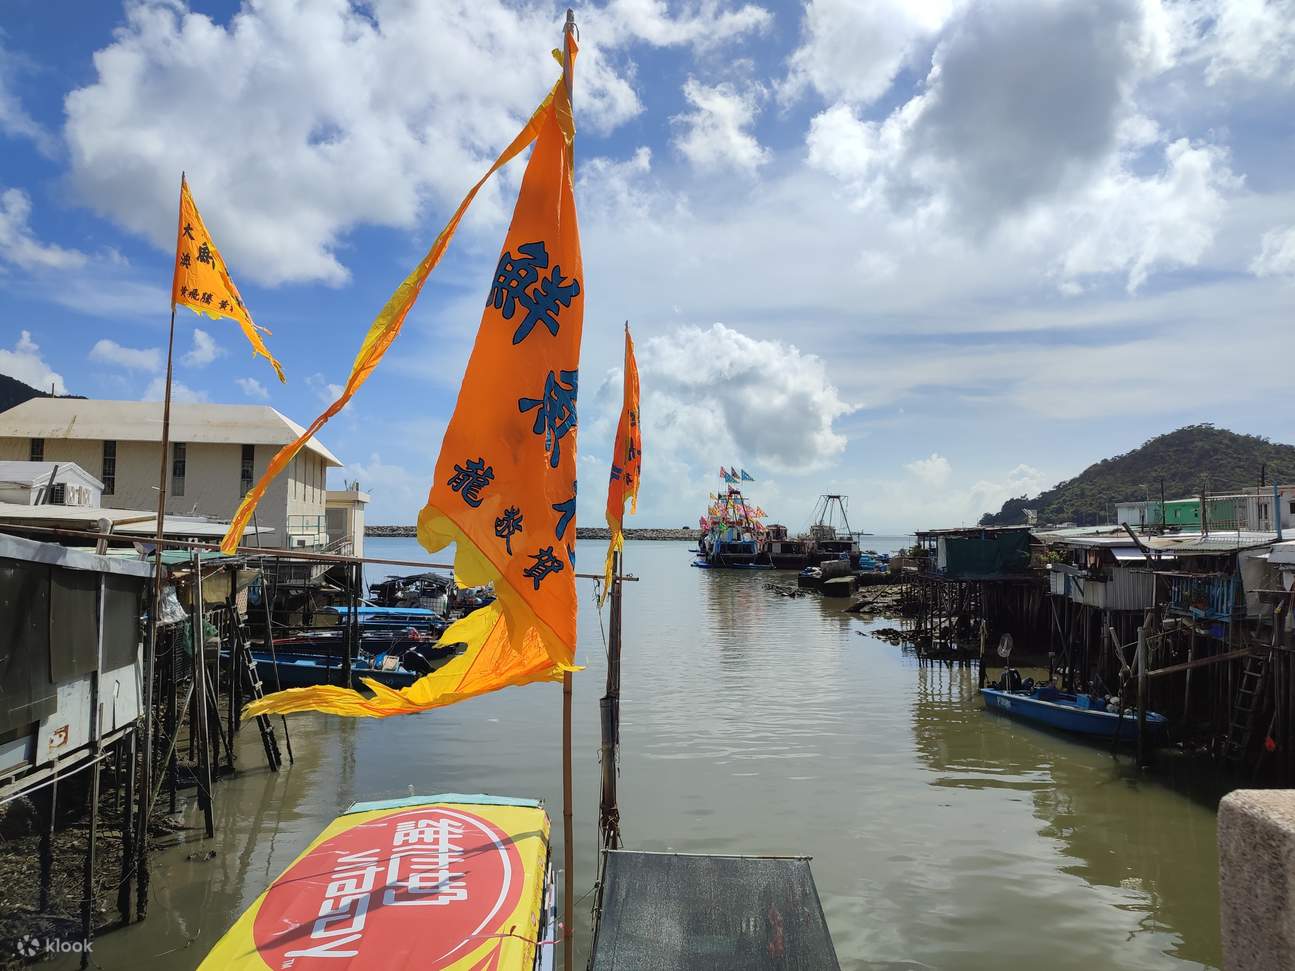 New Route for Hong Kong Water Taxi - Direct Return Ferry from Central to Tai O